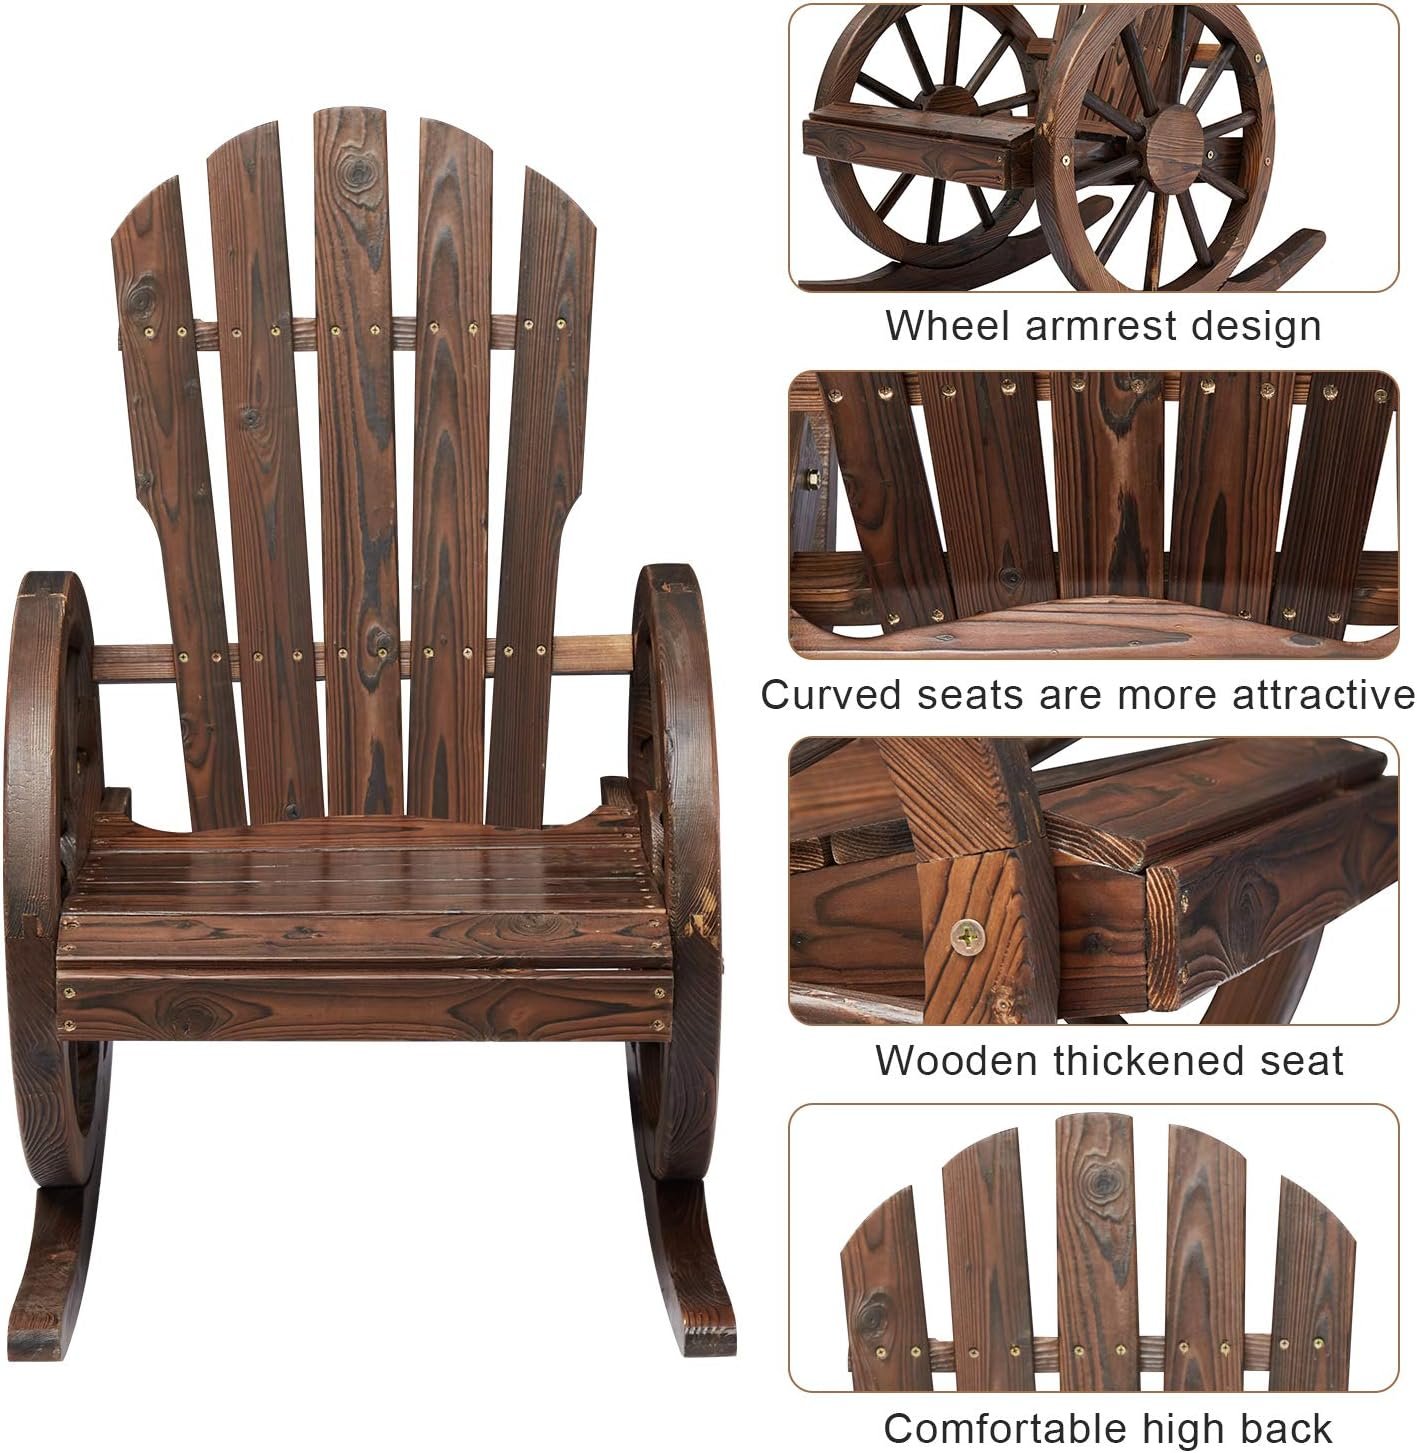 Kinsuite Outdoor Wood Rocking Chair Review